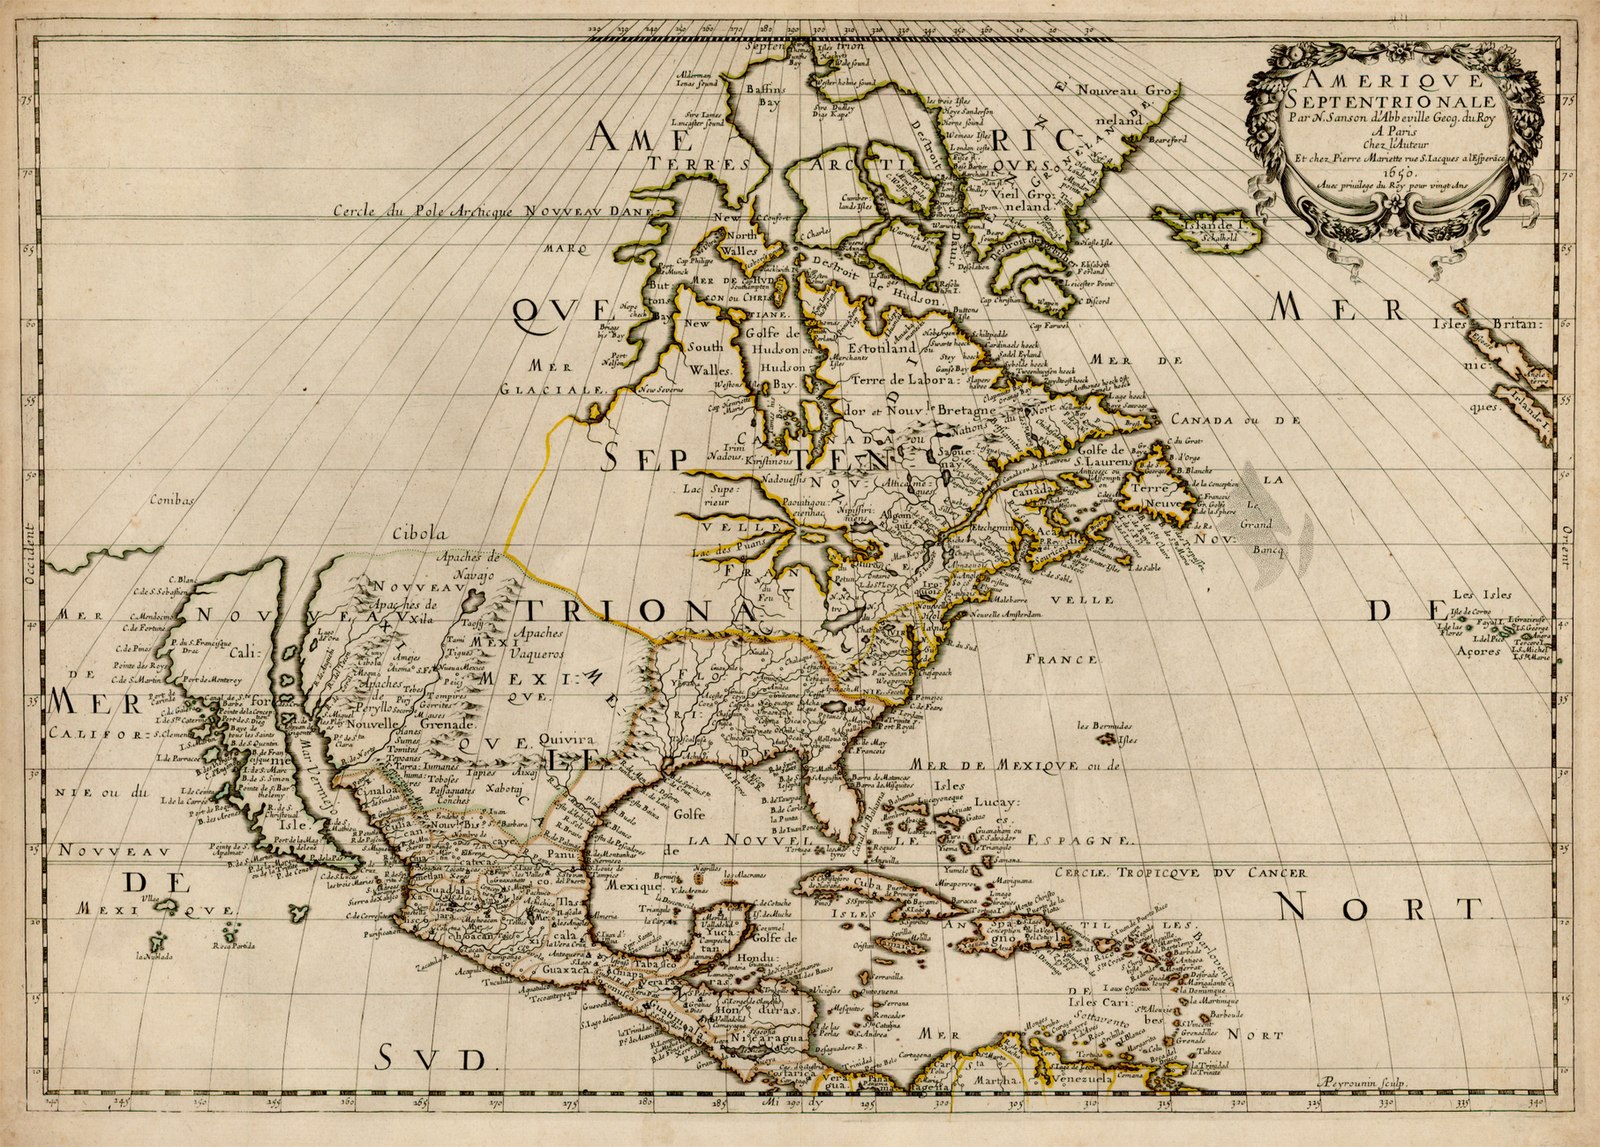 Much of New France's "Pays d'en Haut" (Upper Country) remained unexplored in the mid-1600s; Nicolas Sanson d'Abbeville's 1650 map was the first to show all five Great Lakes.[6]